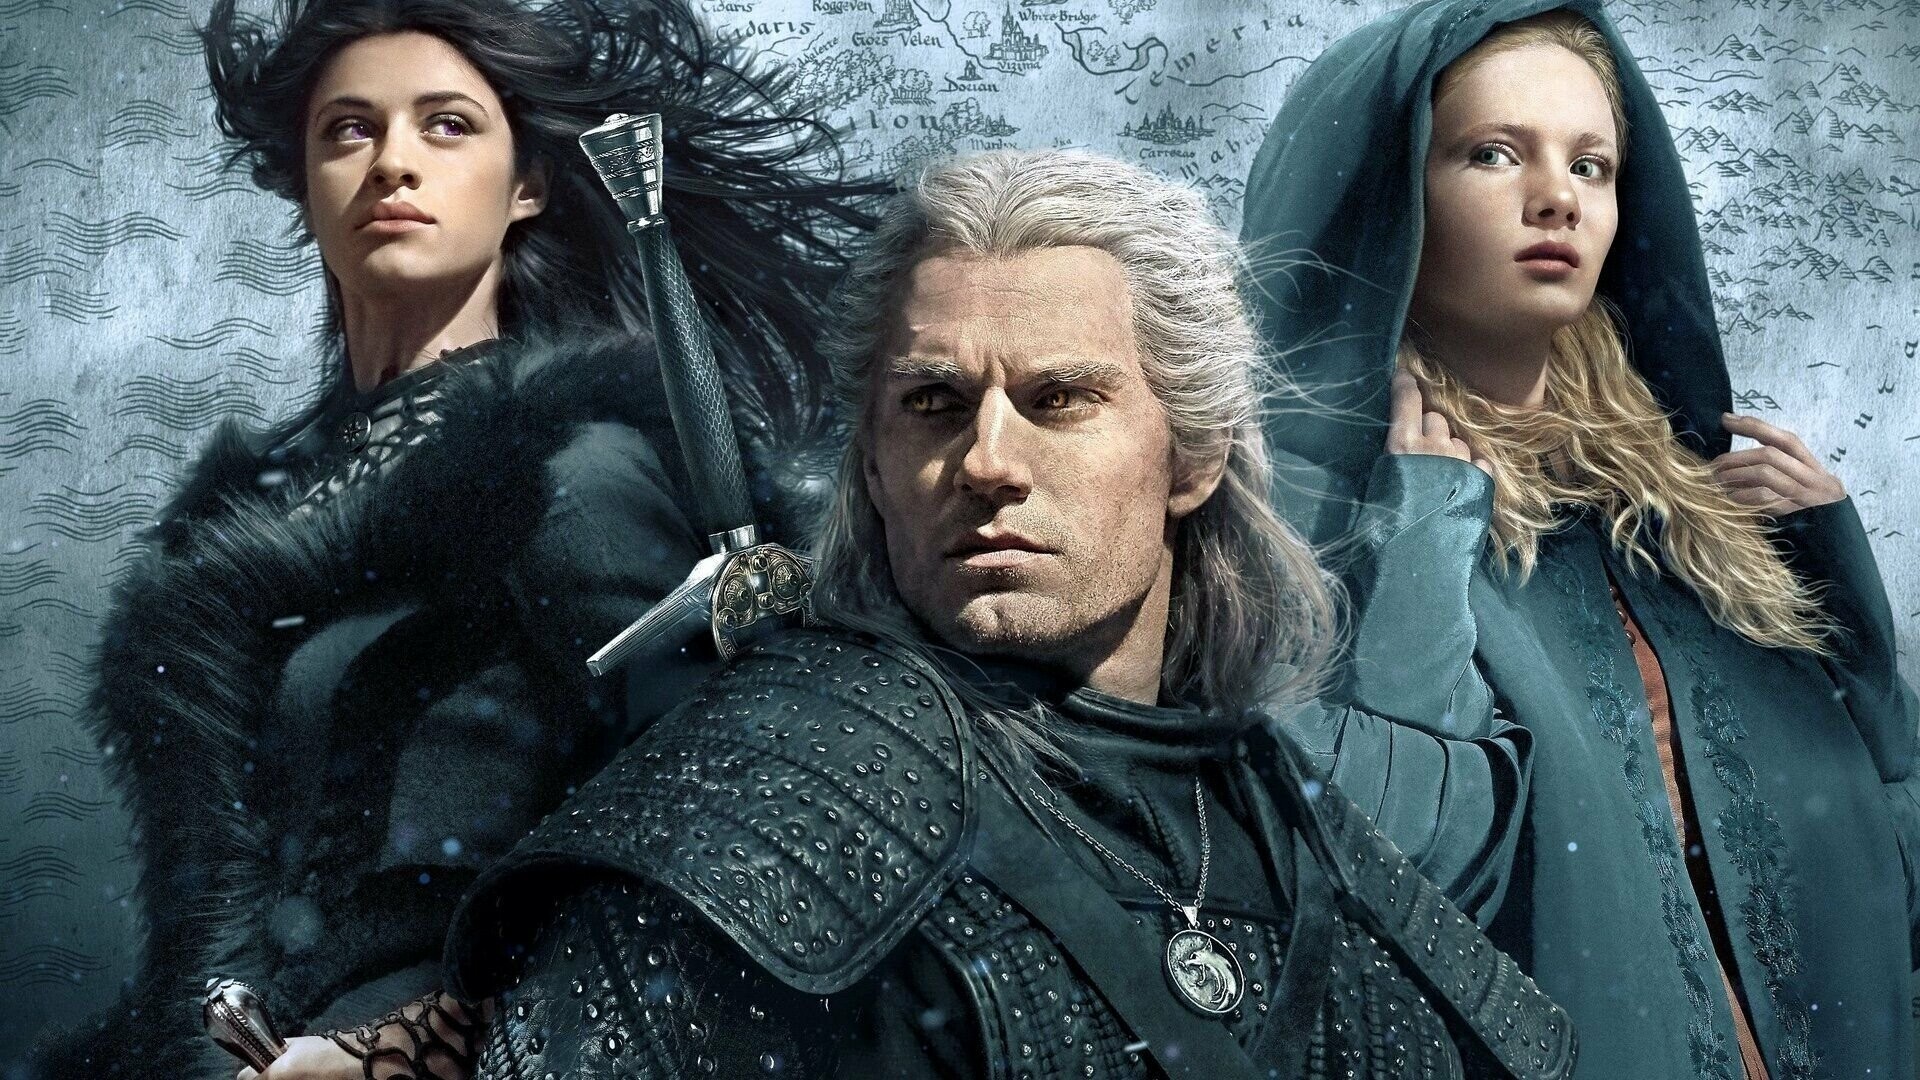 The Witcher (TV Series): A magical hunter of grotesque monsters whose destiny is tied to Princess Ciri. 1920x1080 Full HD Background.